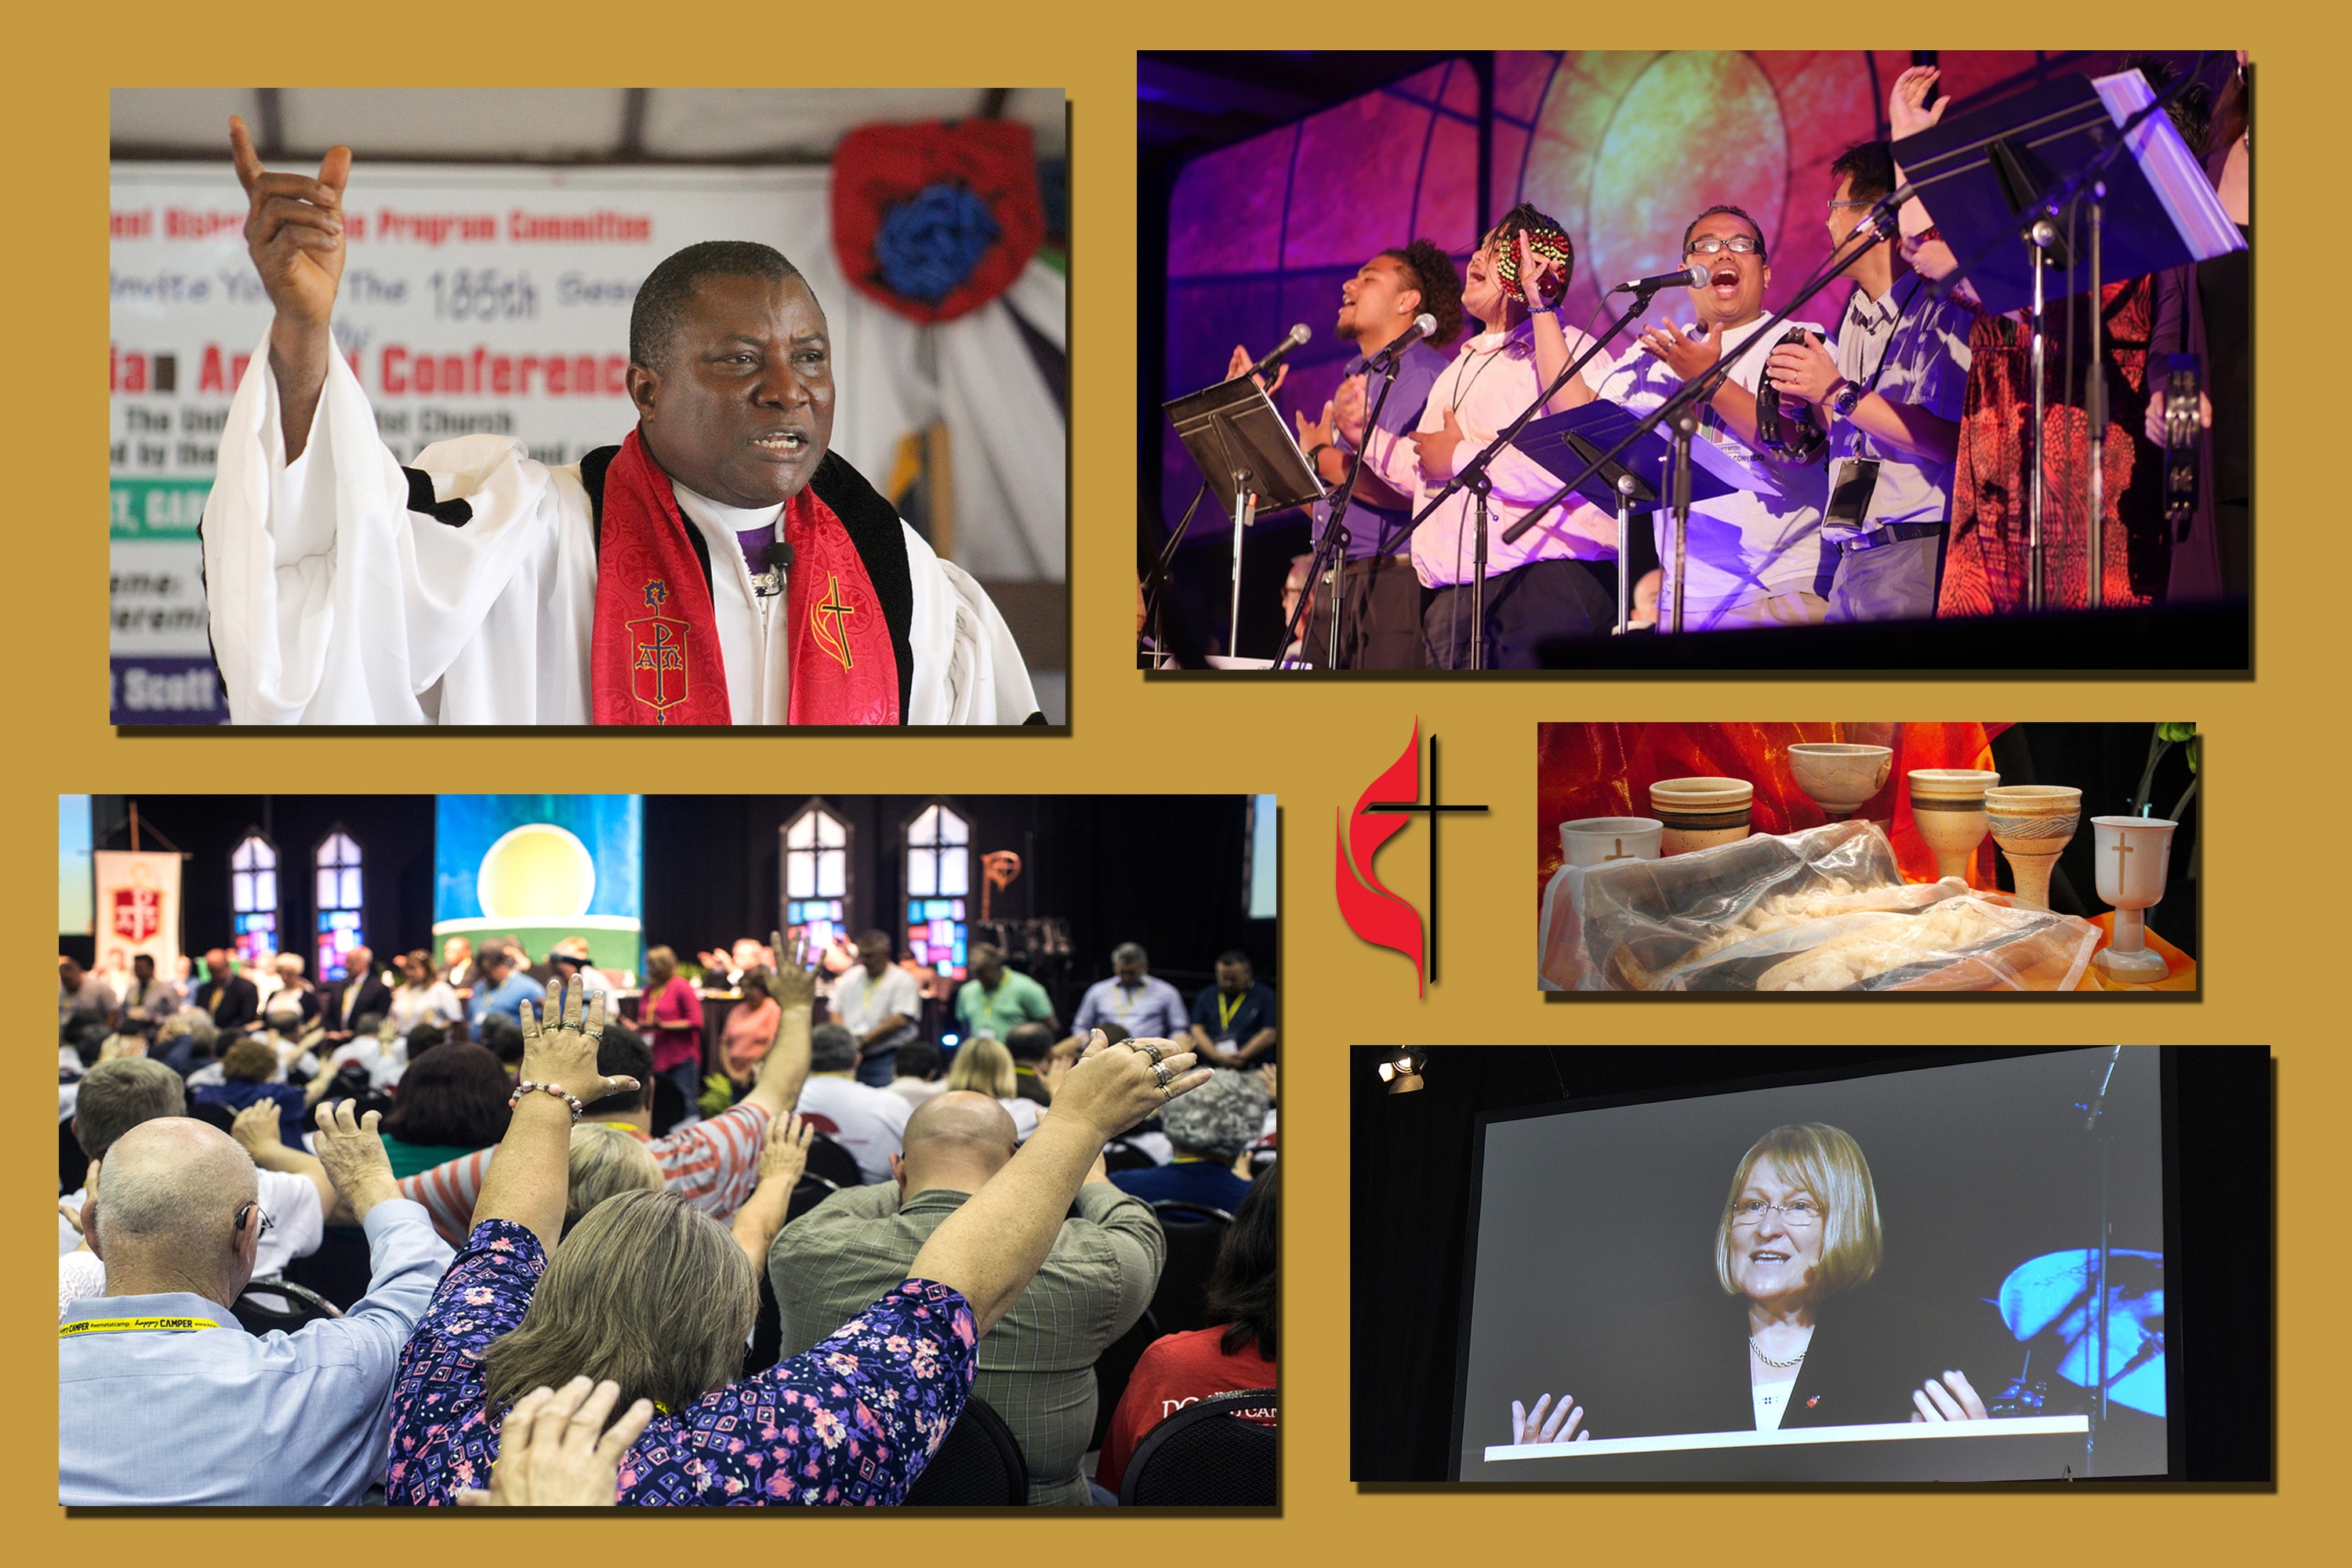 Clockwise from top left: Bishop Samuel J. Quire Jr., 2018 Liberia Annual Conference, photo by E Julu Swen; worship team at 2015 California-Nevada Annual Conference, photo by Koua Vang; chalices and bread at 2015 Dakotas Annual Conference, photo courtesy of the conference; Bishop Rosemarie Wenner, 2015 Germany South Annual Conference, photo by Klaus Ulrich Ruof; attendees of 2017 Kentucky Annual Conference, photo by Kathleen Barry.